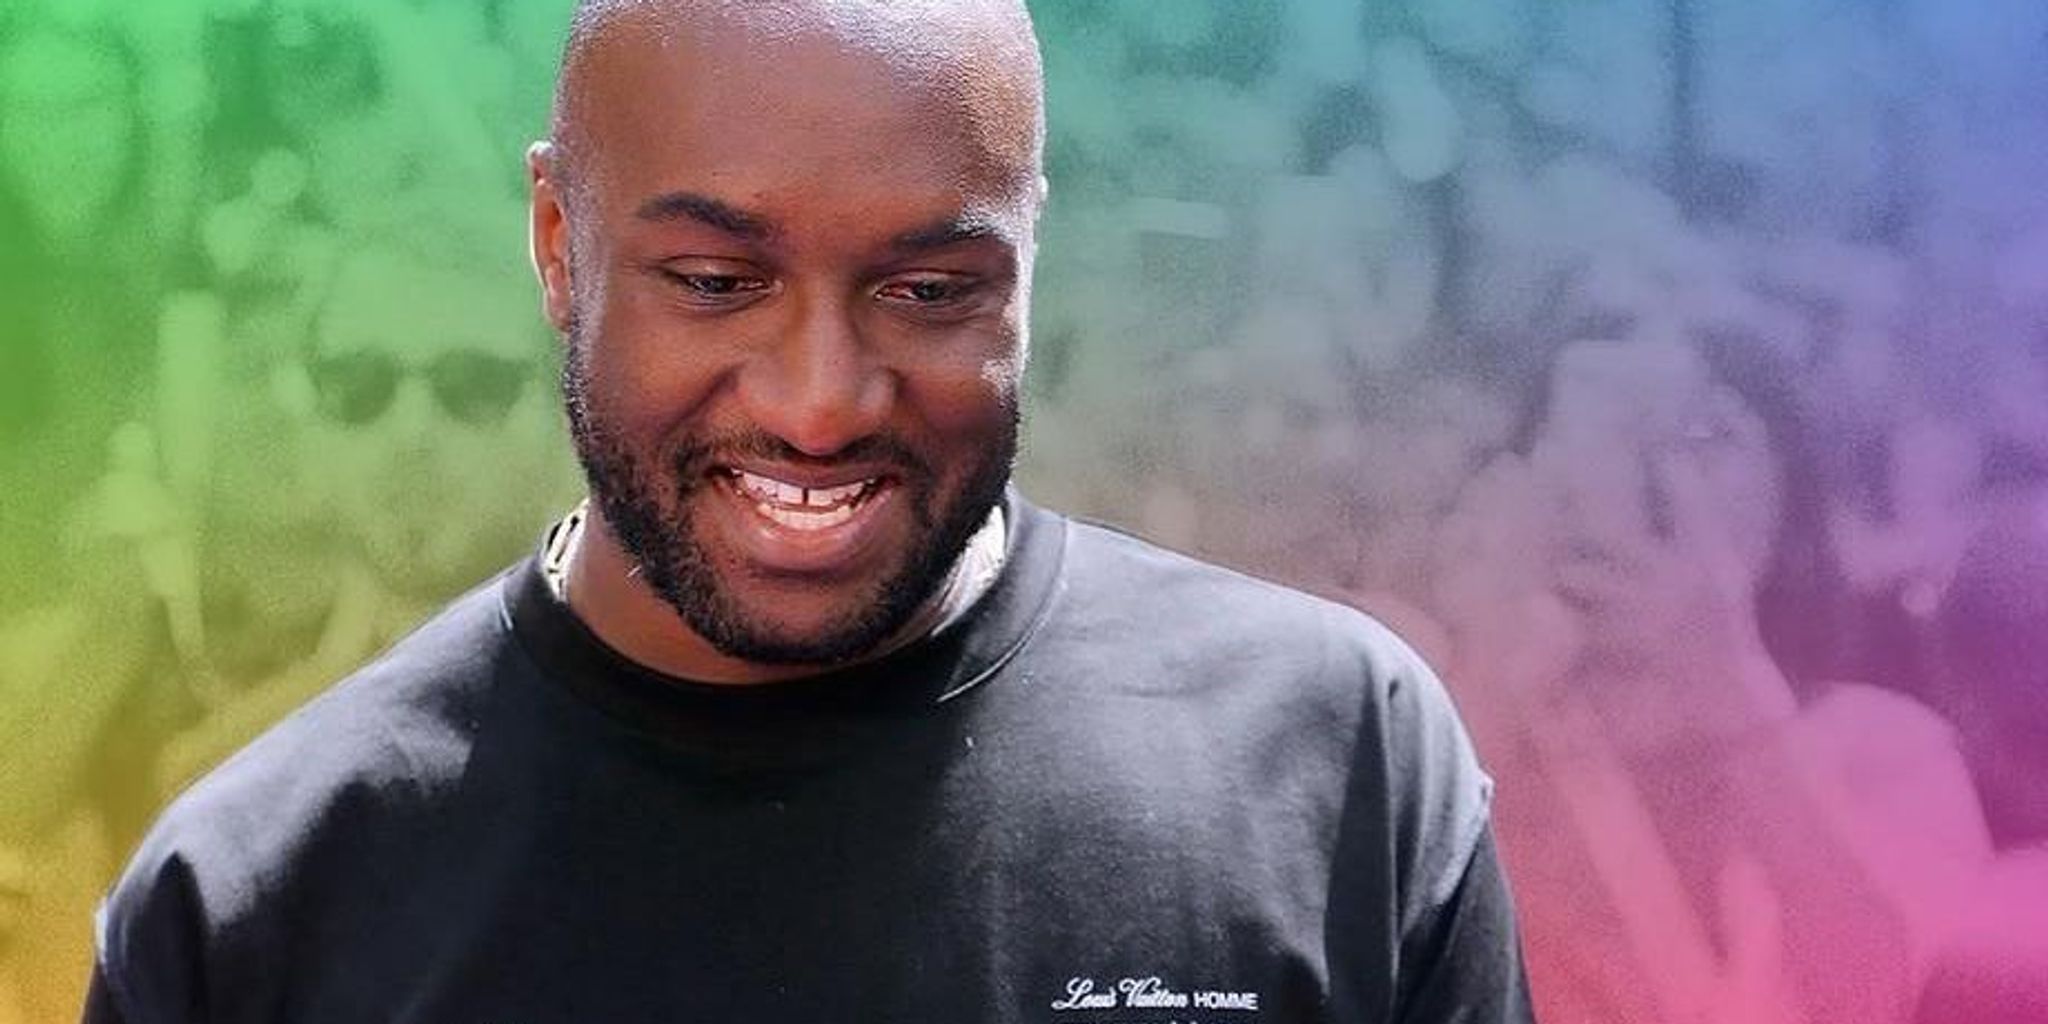 REMEMBERING VIRGIL ABLOH: A VISIONARY DESIGNER AND CULTURE PIONEER